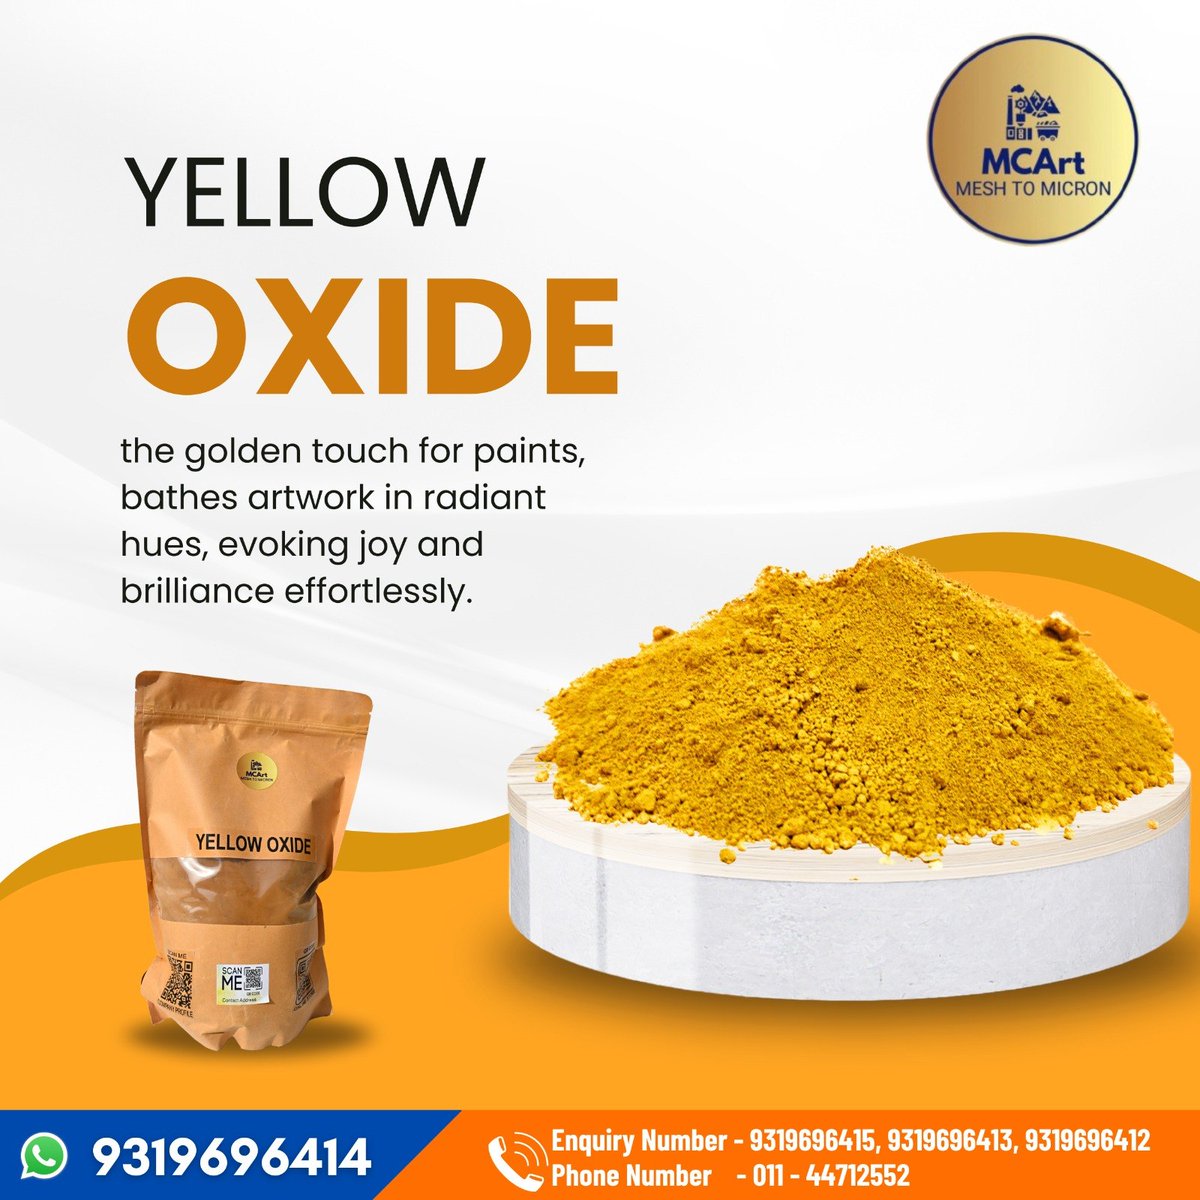 Unleash the golden touch with Yellow Oxide! 
For more details
Whatsapp us at 093196 96414

#Mcart #Meshtomicron #Minerals #Chemicals #MineralResources #ChemicalIndustry #MineralExtraction #ChemicalCompounds #YellowOxide #GoldenTouch #RadiantHues #JoyfulArt #BrilliantColor